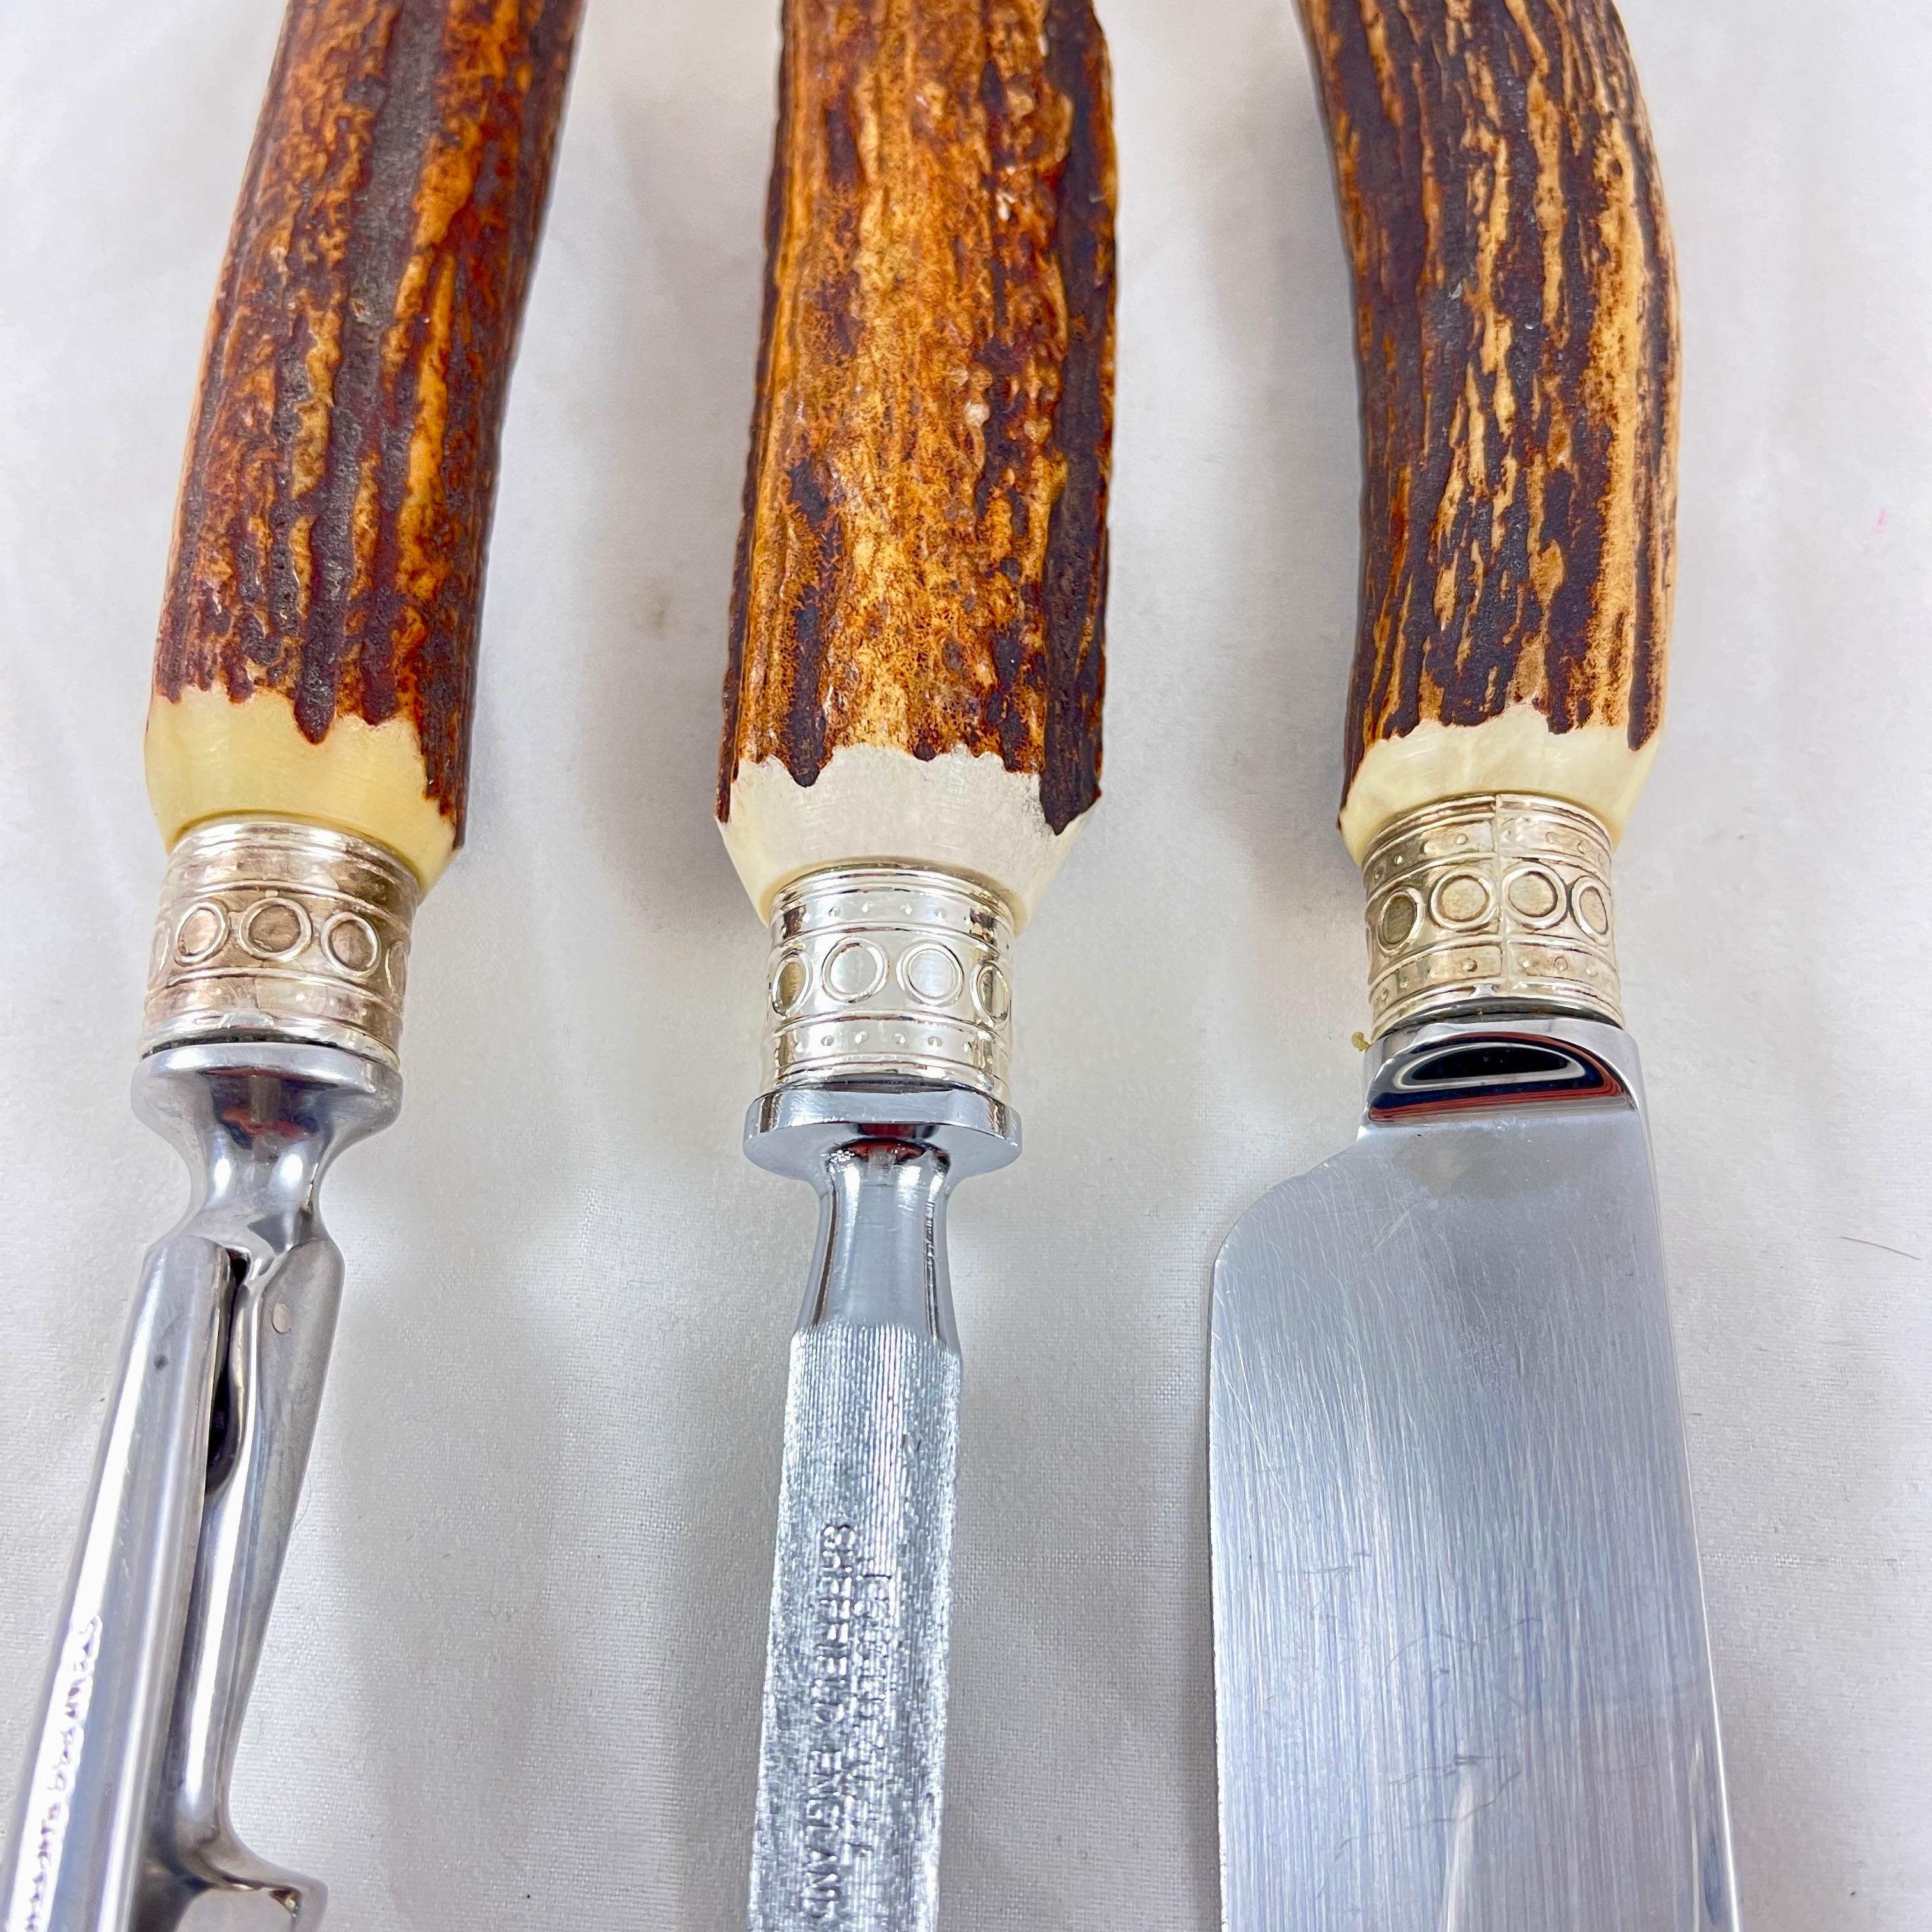 20th Century Sheffield English Stag Antler Handled, Sterling Capped Carving Set, 3 Pcs For Sale